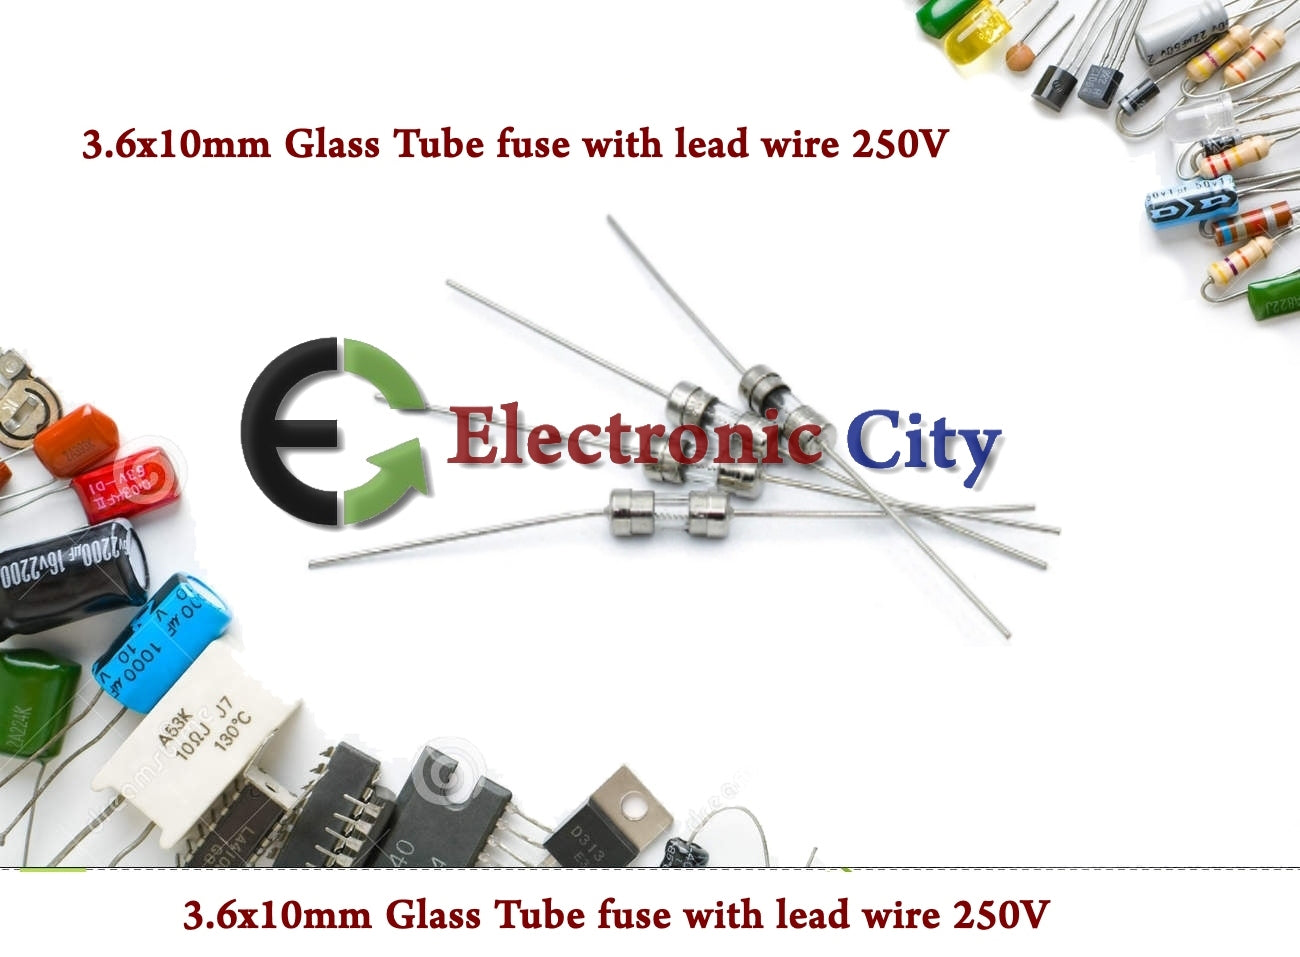 3.6x10mm Glass Tube fuse with lead wire 250V